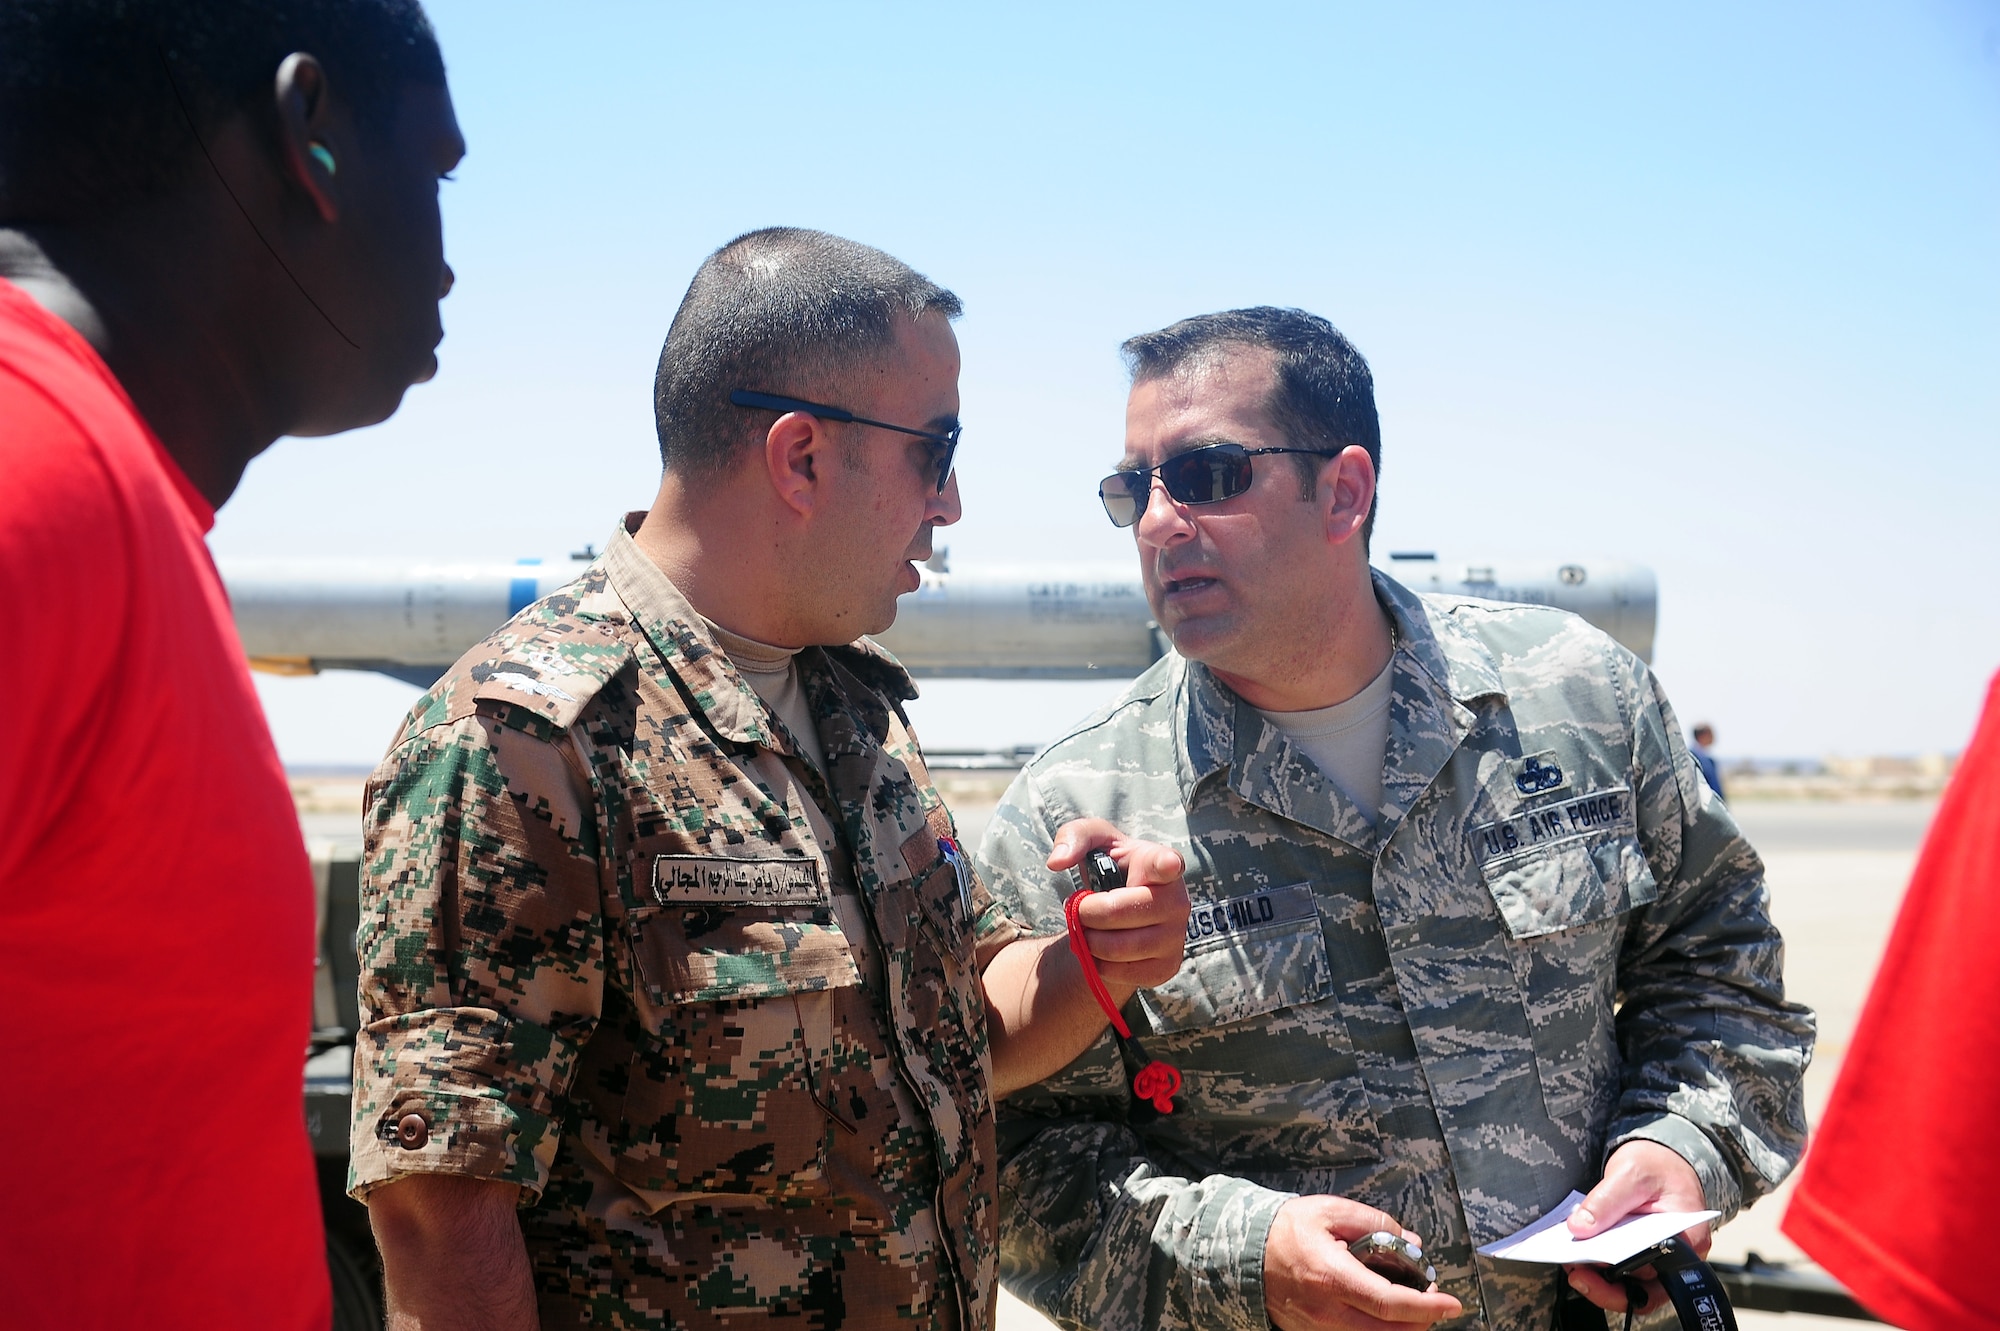 U.S. Air Force Chief Master Sgt. Edward Hauschild, the munitions superintendent from the 140th Maintenance Squadron from the Colorado Air National Guard, talks to a member of the Royal Jordanian Air Force after a load competition during Exercise Eager Tiger May 11, 2014, at an air base in northern Jordan. For 10 years, the COANG and Jordan have been paired under the National Guard Bureau's State Partnership Program, which aims to partner states and countries for a mutually beneficial relationship. (U.S. Air Force photo by Staff Sgt. Brigitte N. Brantley/Released)